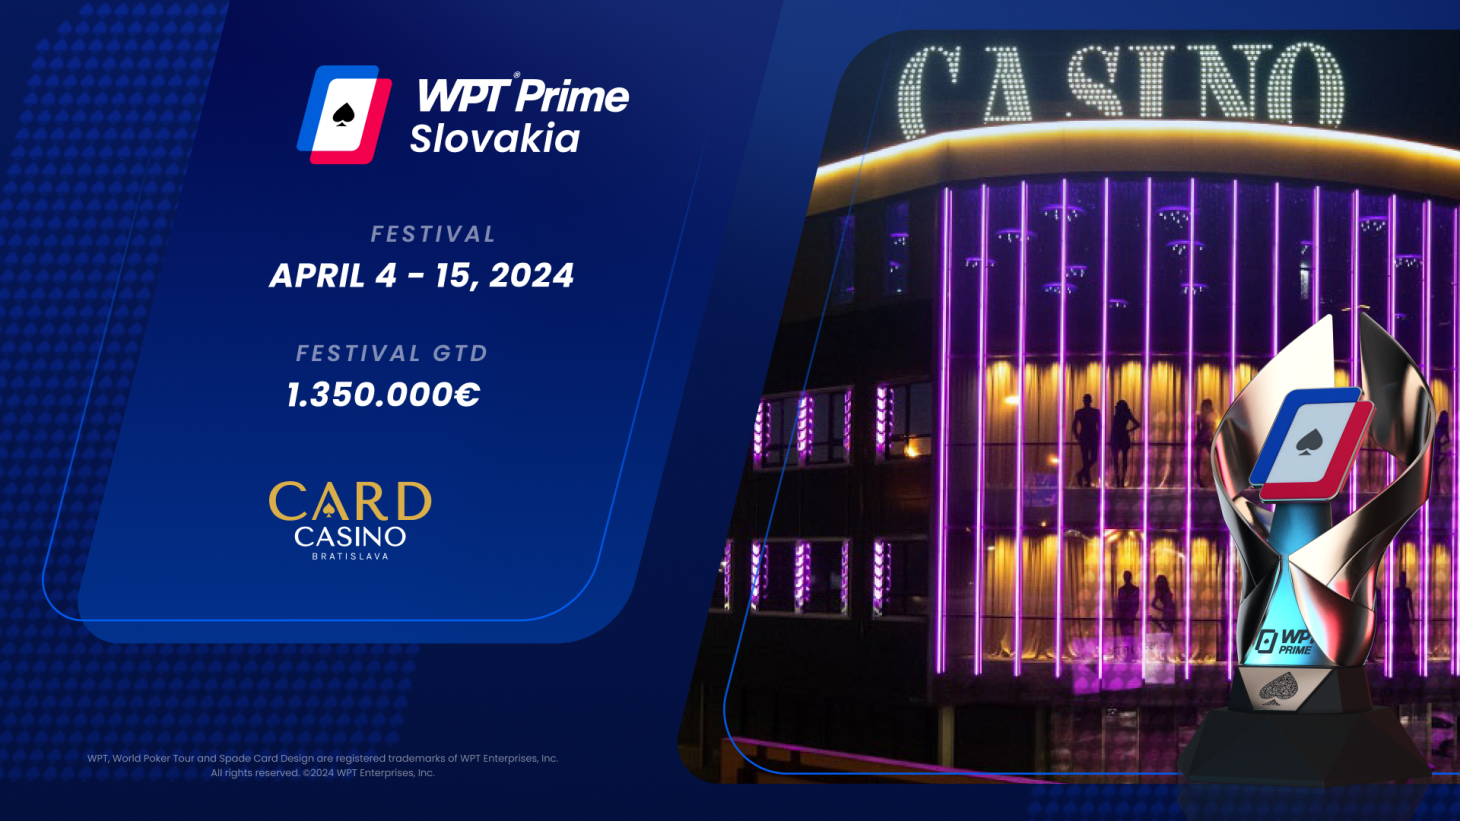 The WPT returns to Card Casino. The World Festival Guarantee is €1,350,000!